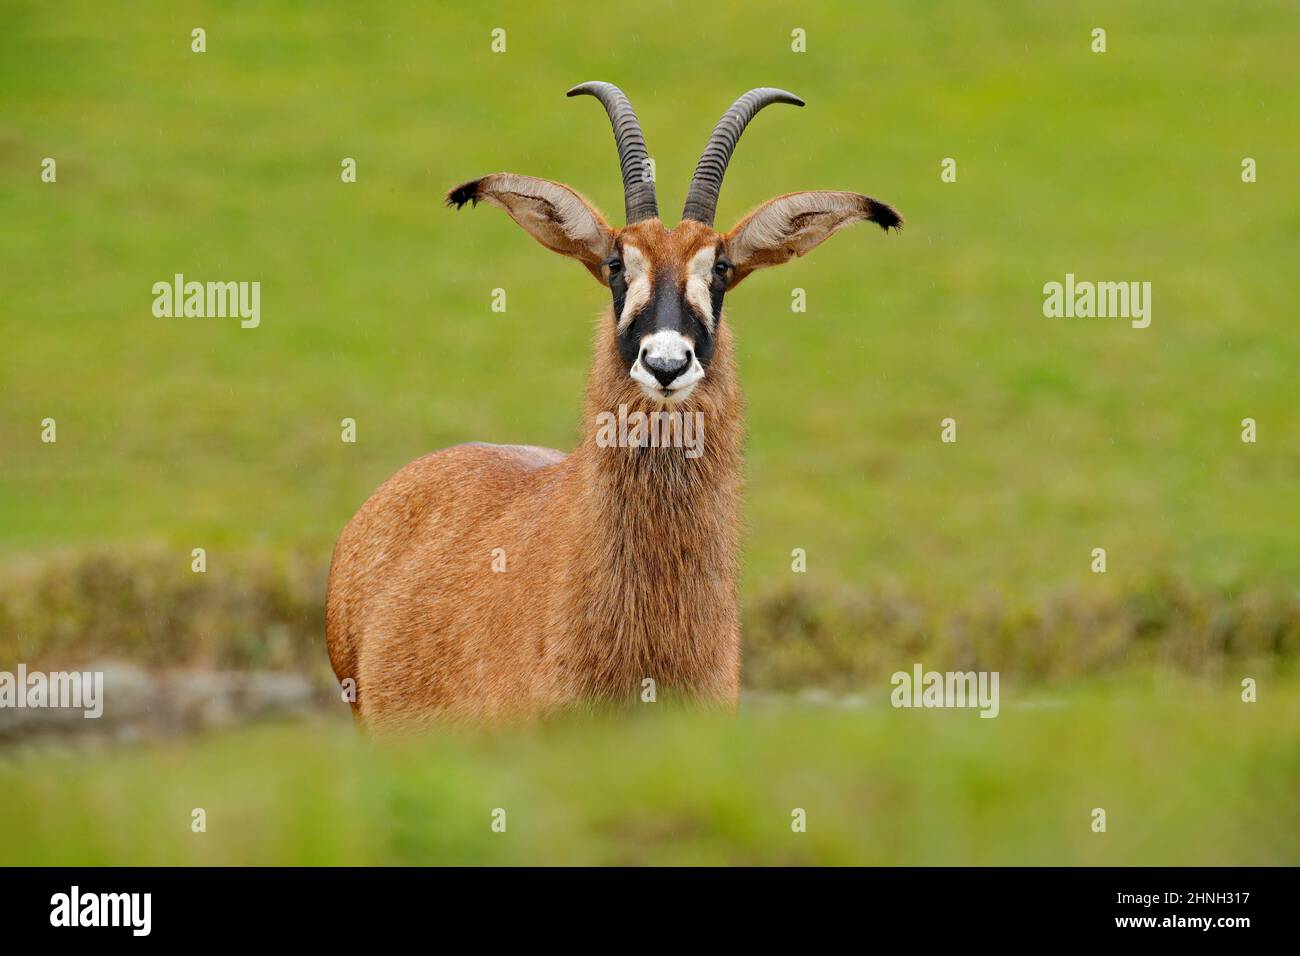 Roan antelope, Hippotragus equinus, savanna antelope found in West, Central, East and Southern Africa. Detail portrait of mammal, head with big ears a Stock Photo